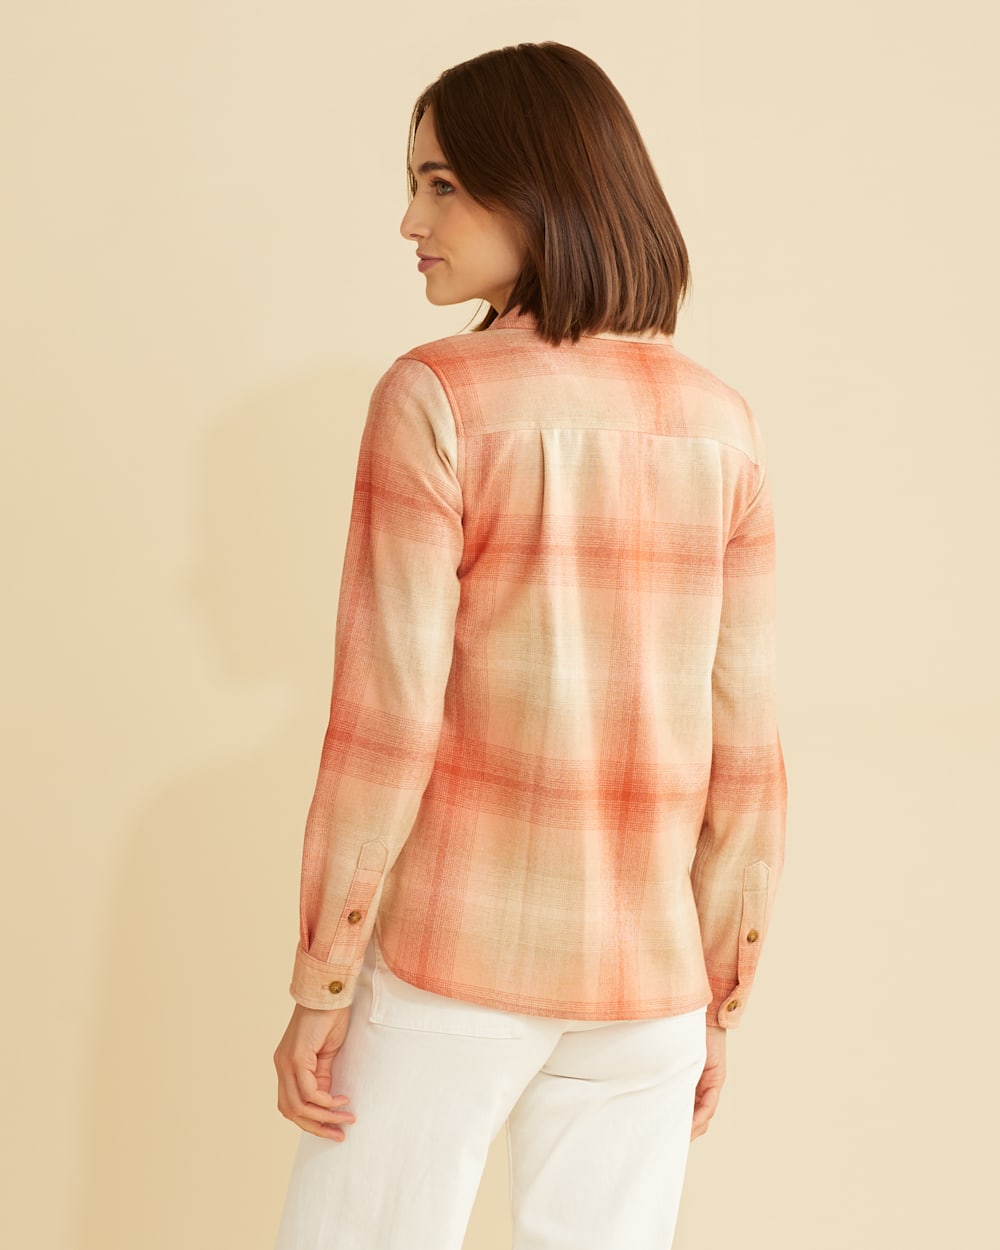 ALTERNATE VIEW OF WOMEN'S BOARD SHIRT IN APRICOT OMBRE image number 3